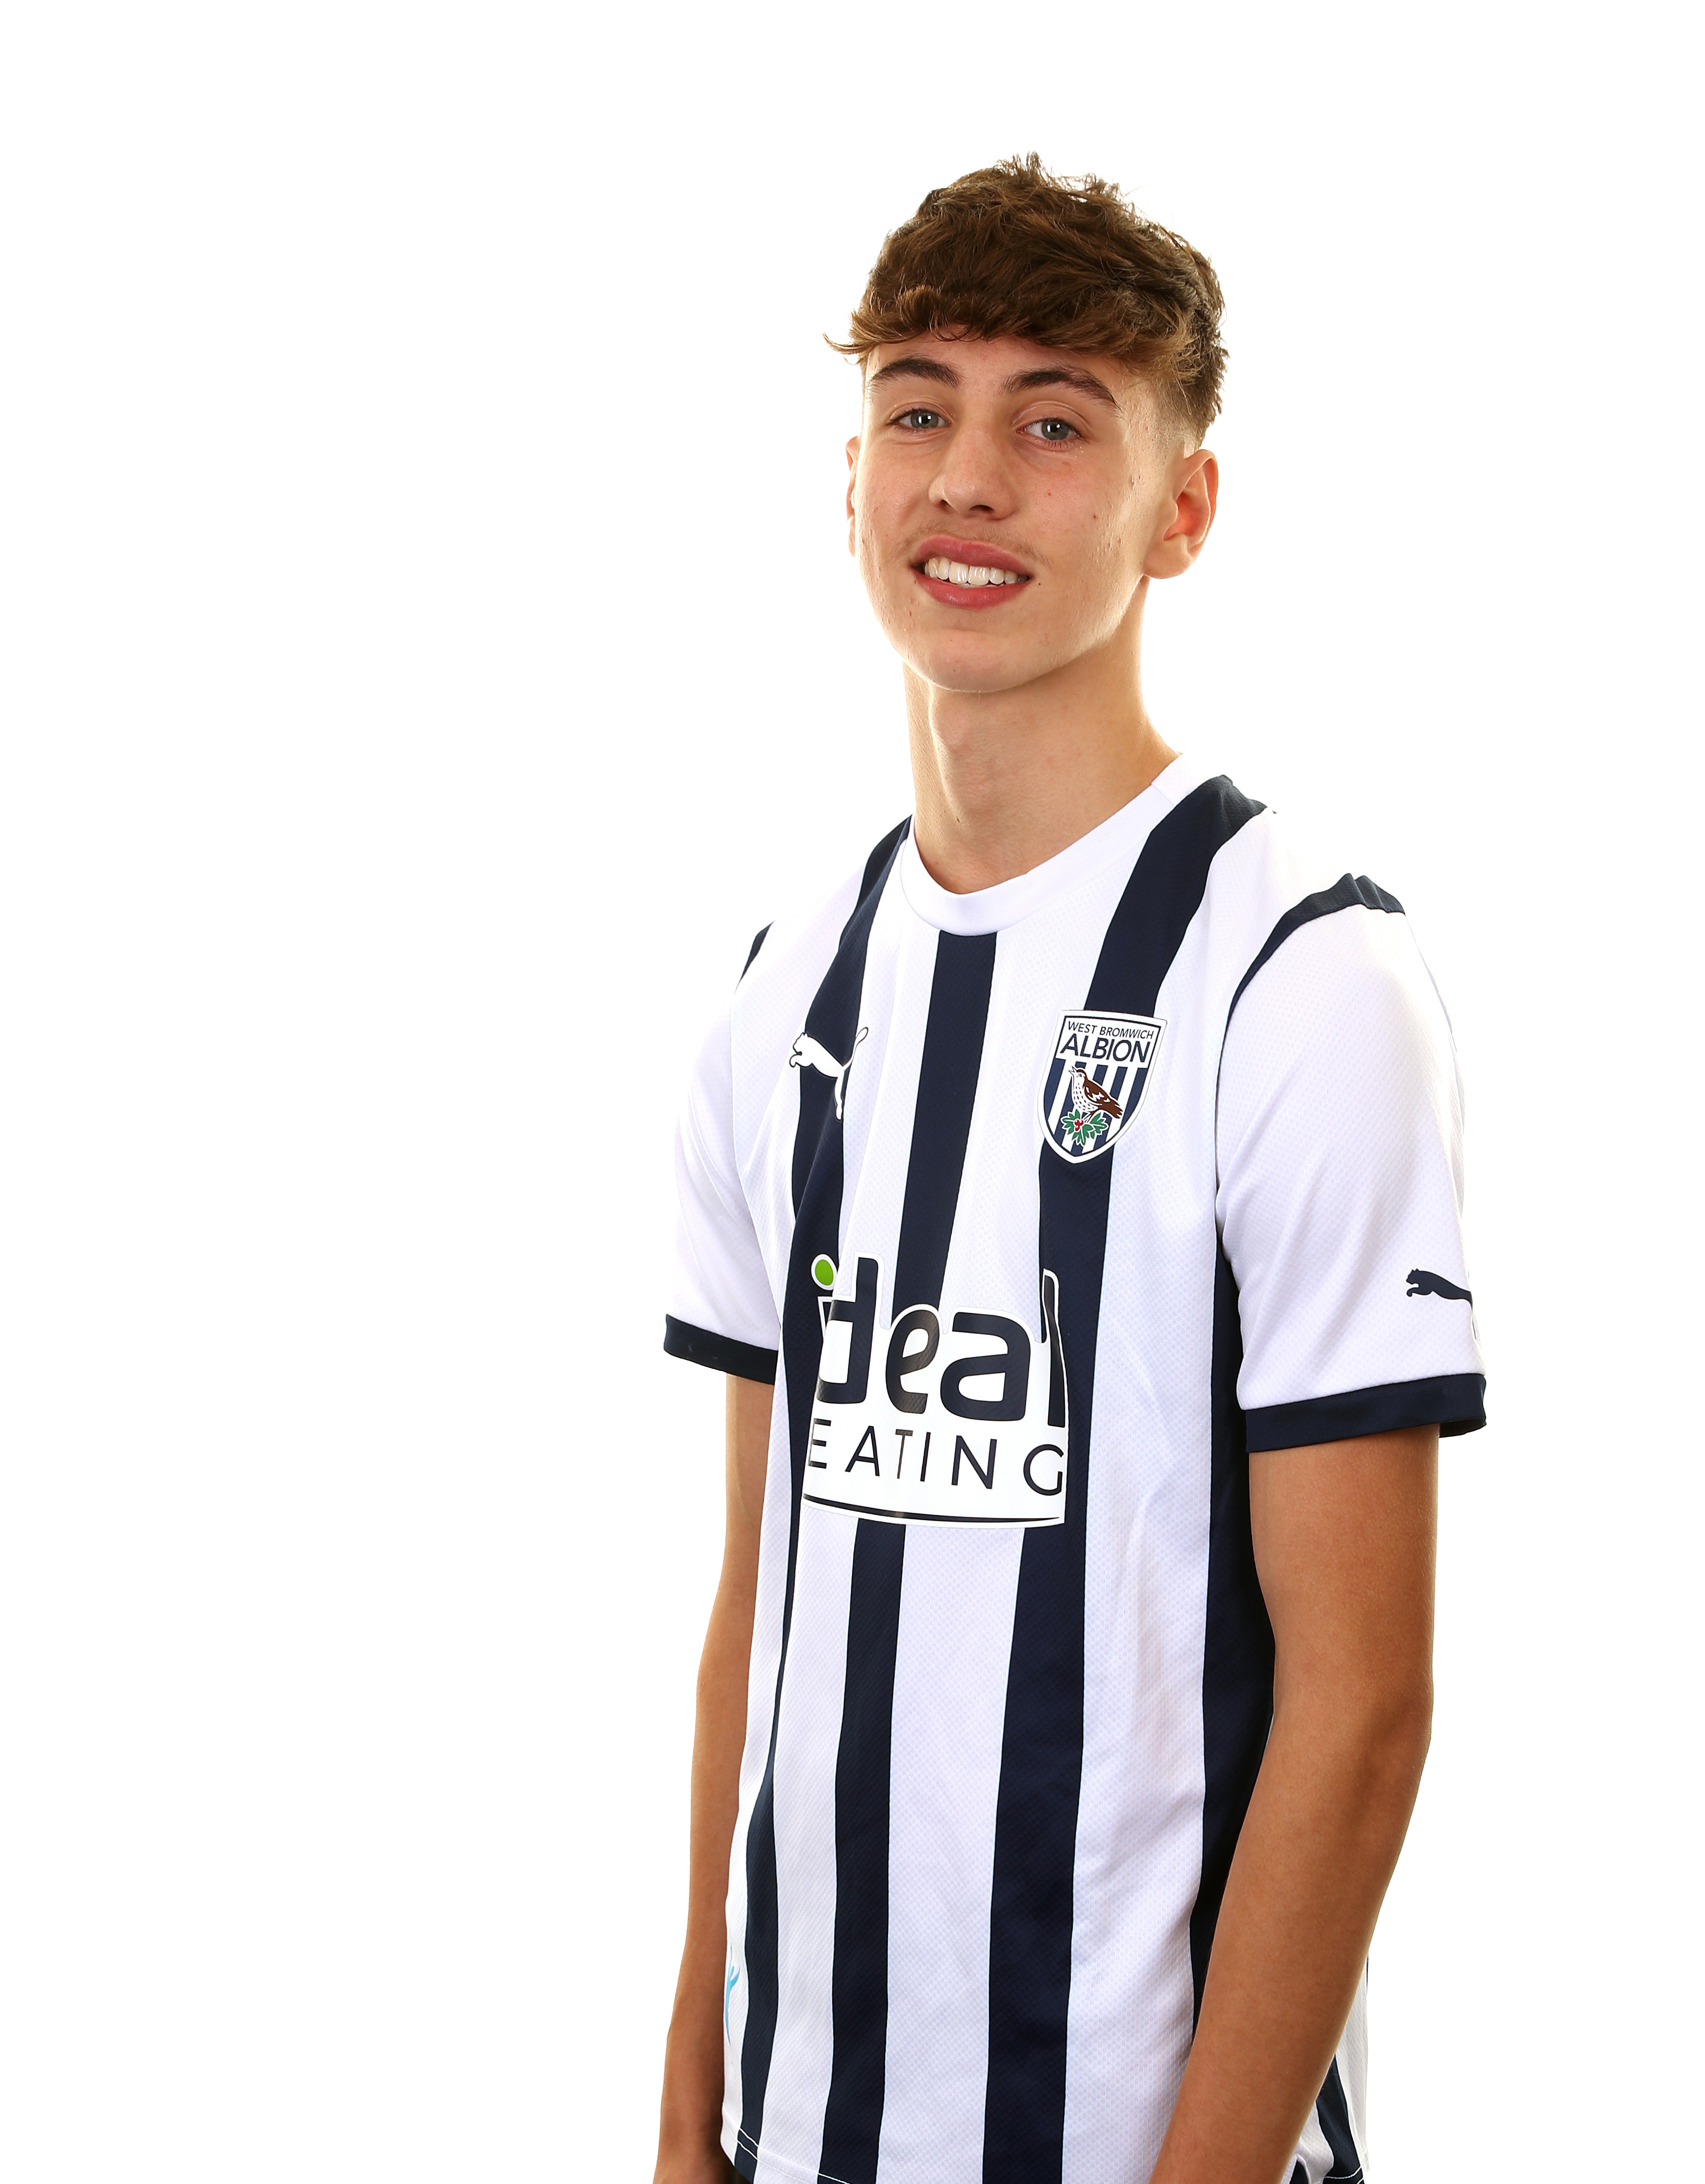 A photo headshot of Albion Under-18s player Sam Beedie ahead of the 2023/24 season